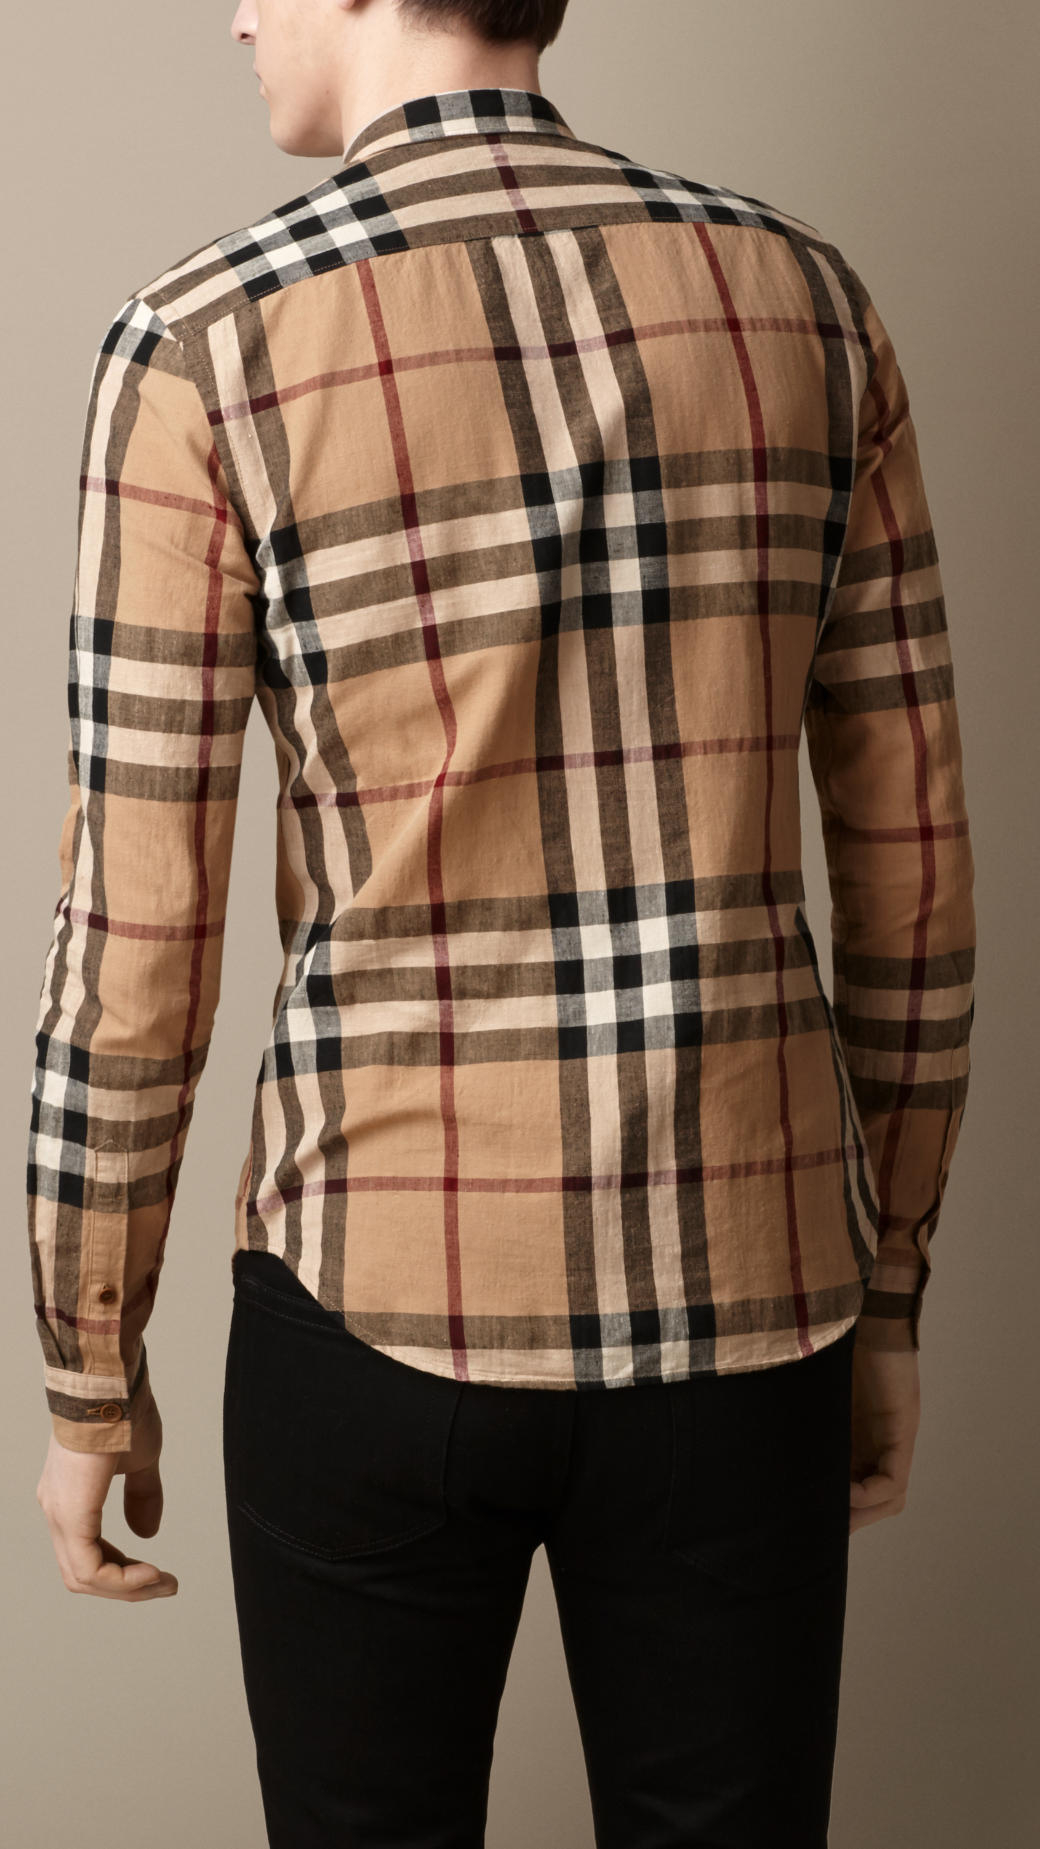 Lyst - Burberry Exploded Check Cotton Linen Shirt in Brown for Men